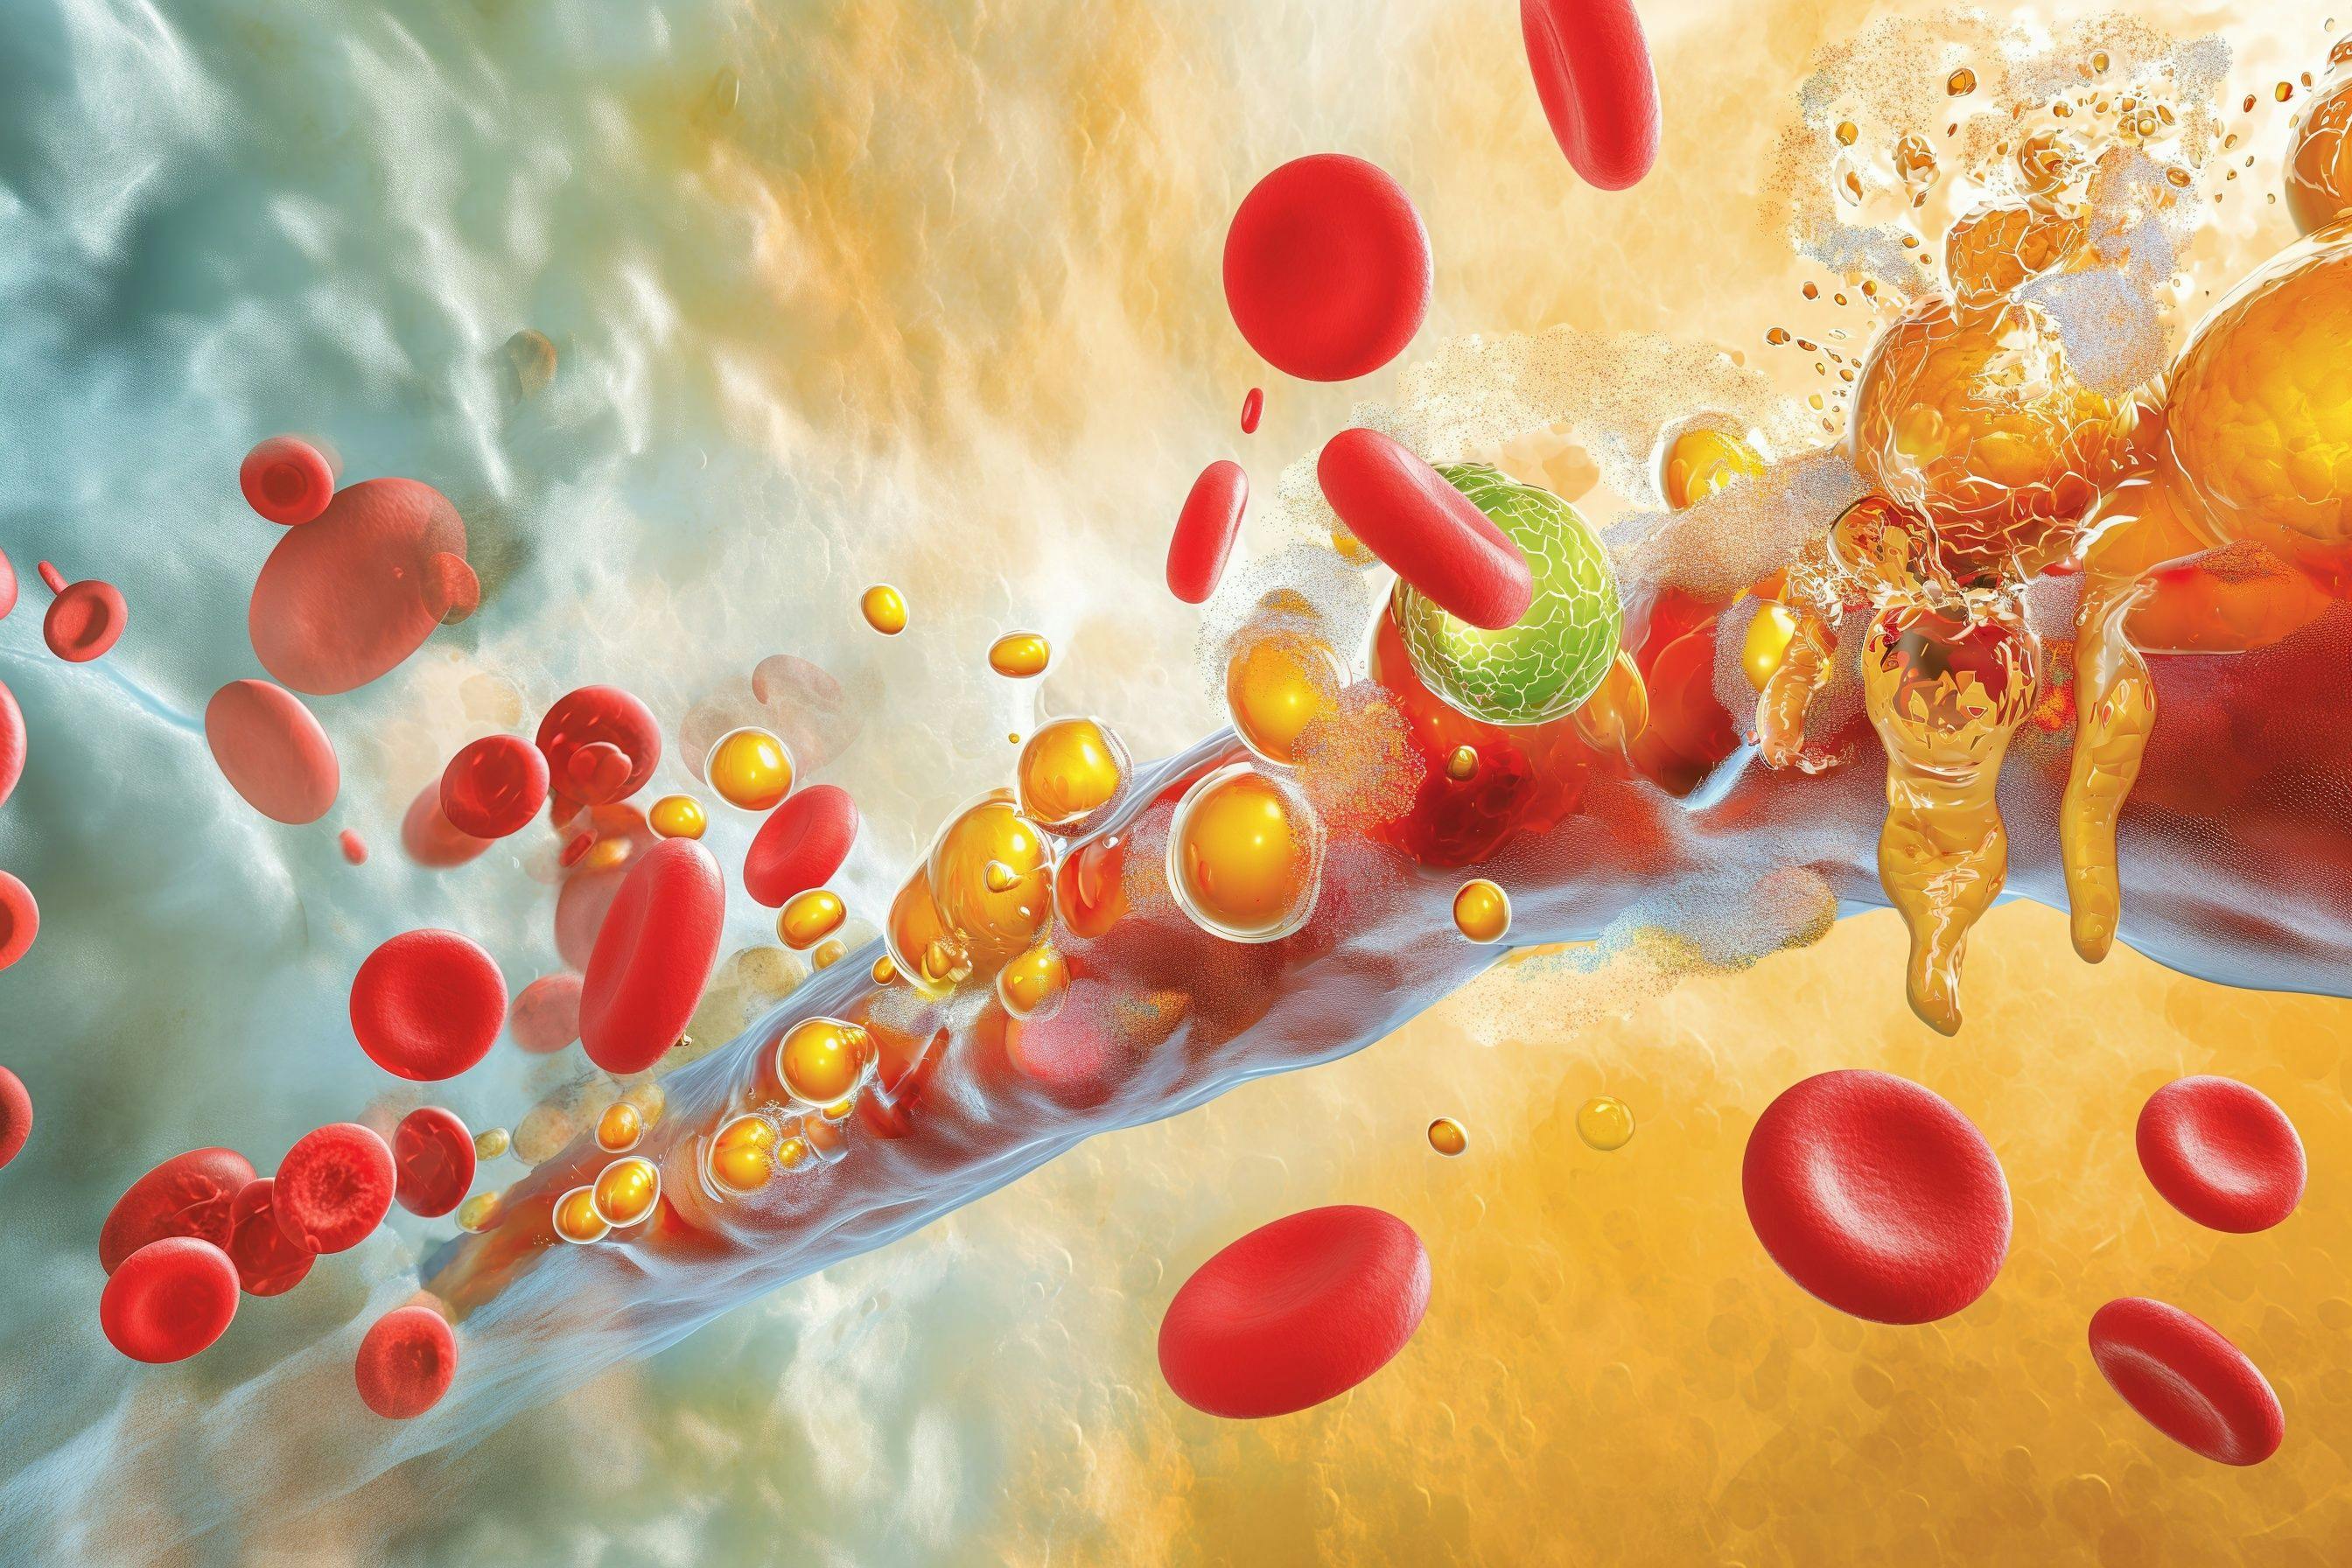 Digital illustration of cholesterol and lipid particles. | Credit: Adobe Stock